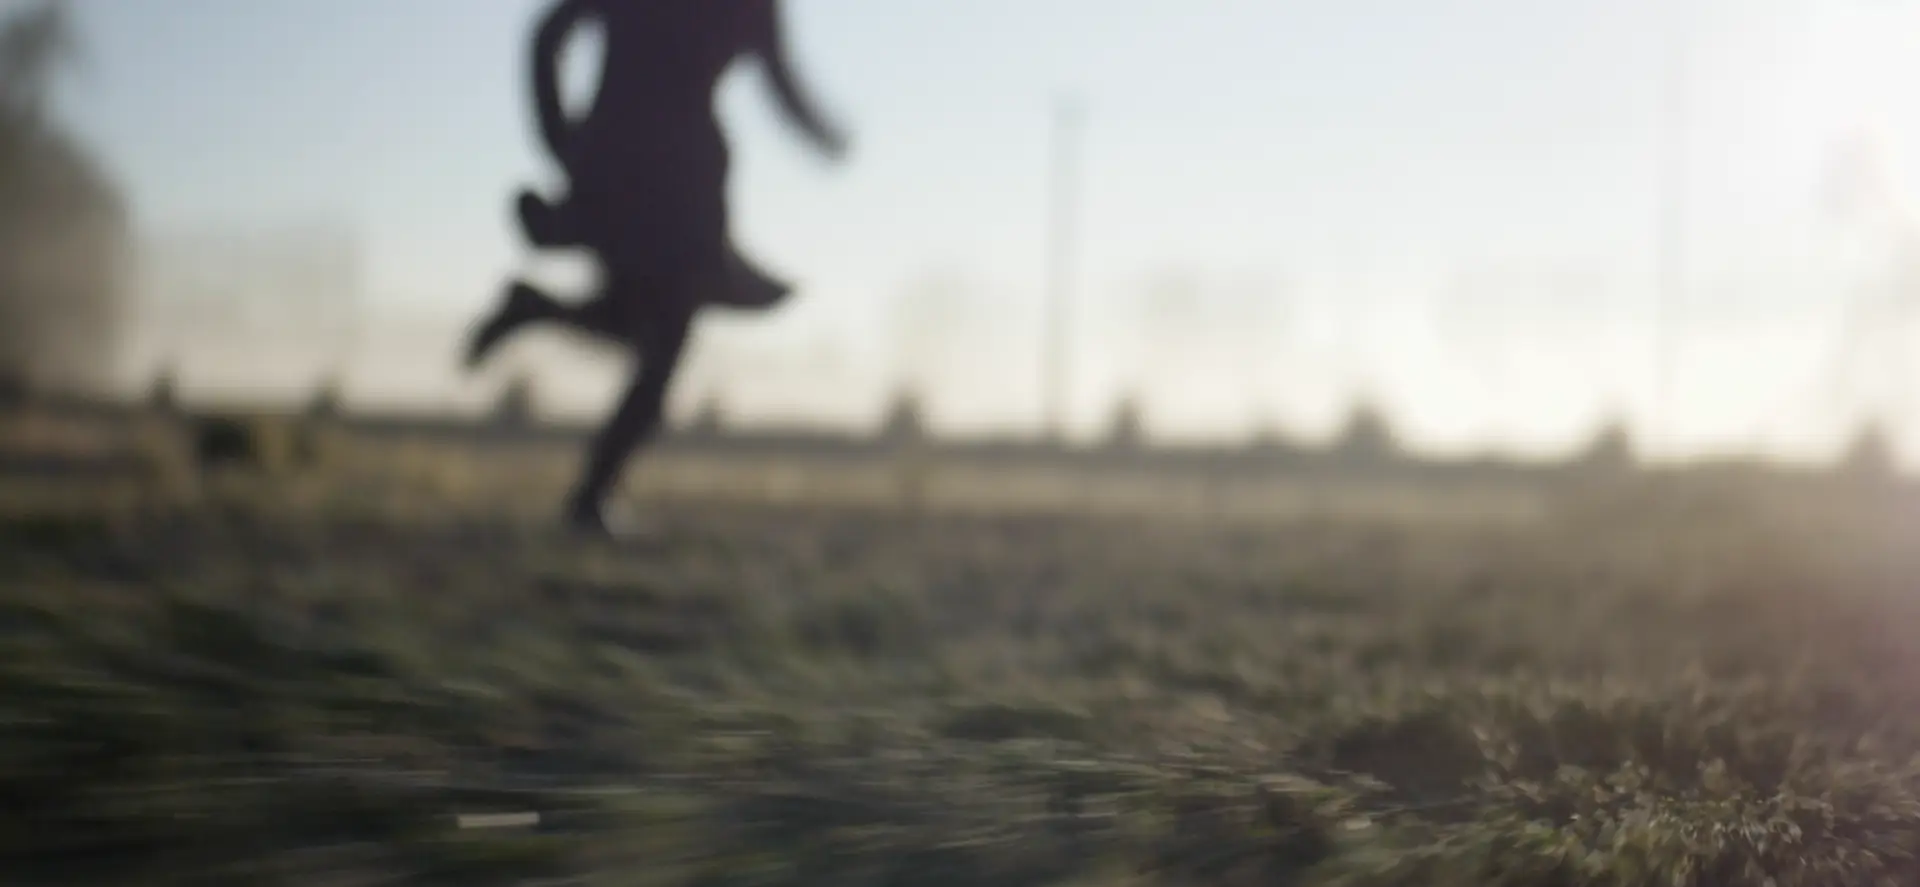 A woman is running on a grassy field, featuring entertainment.